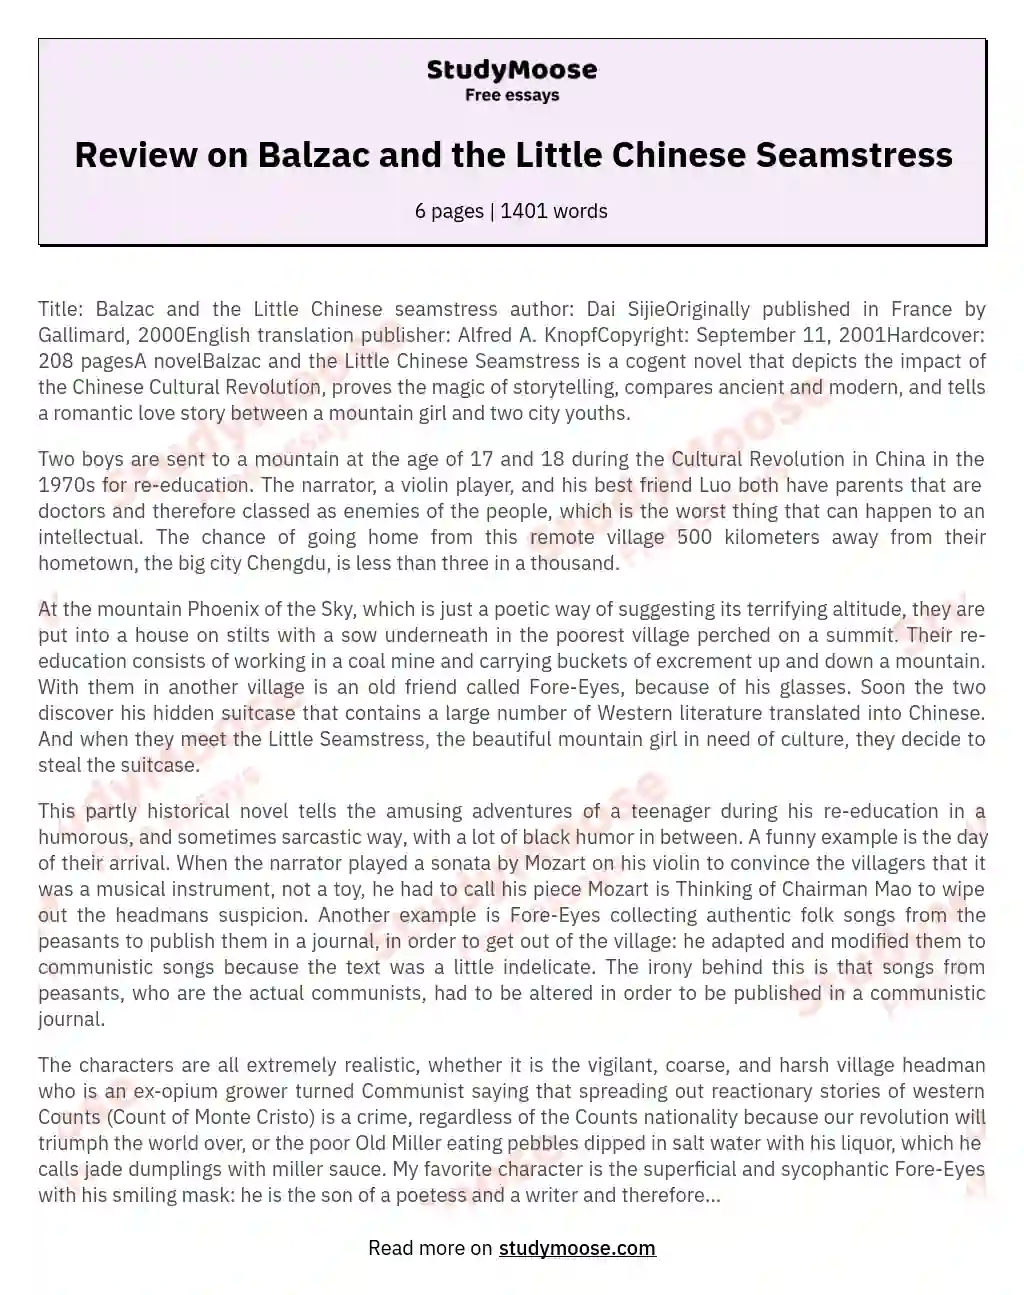 Balzac and the Little Chinese Seamstress: A Tale of Love, Literature, and Revolution essay